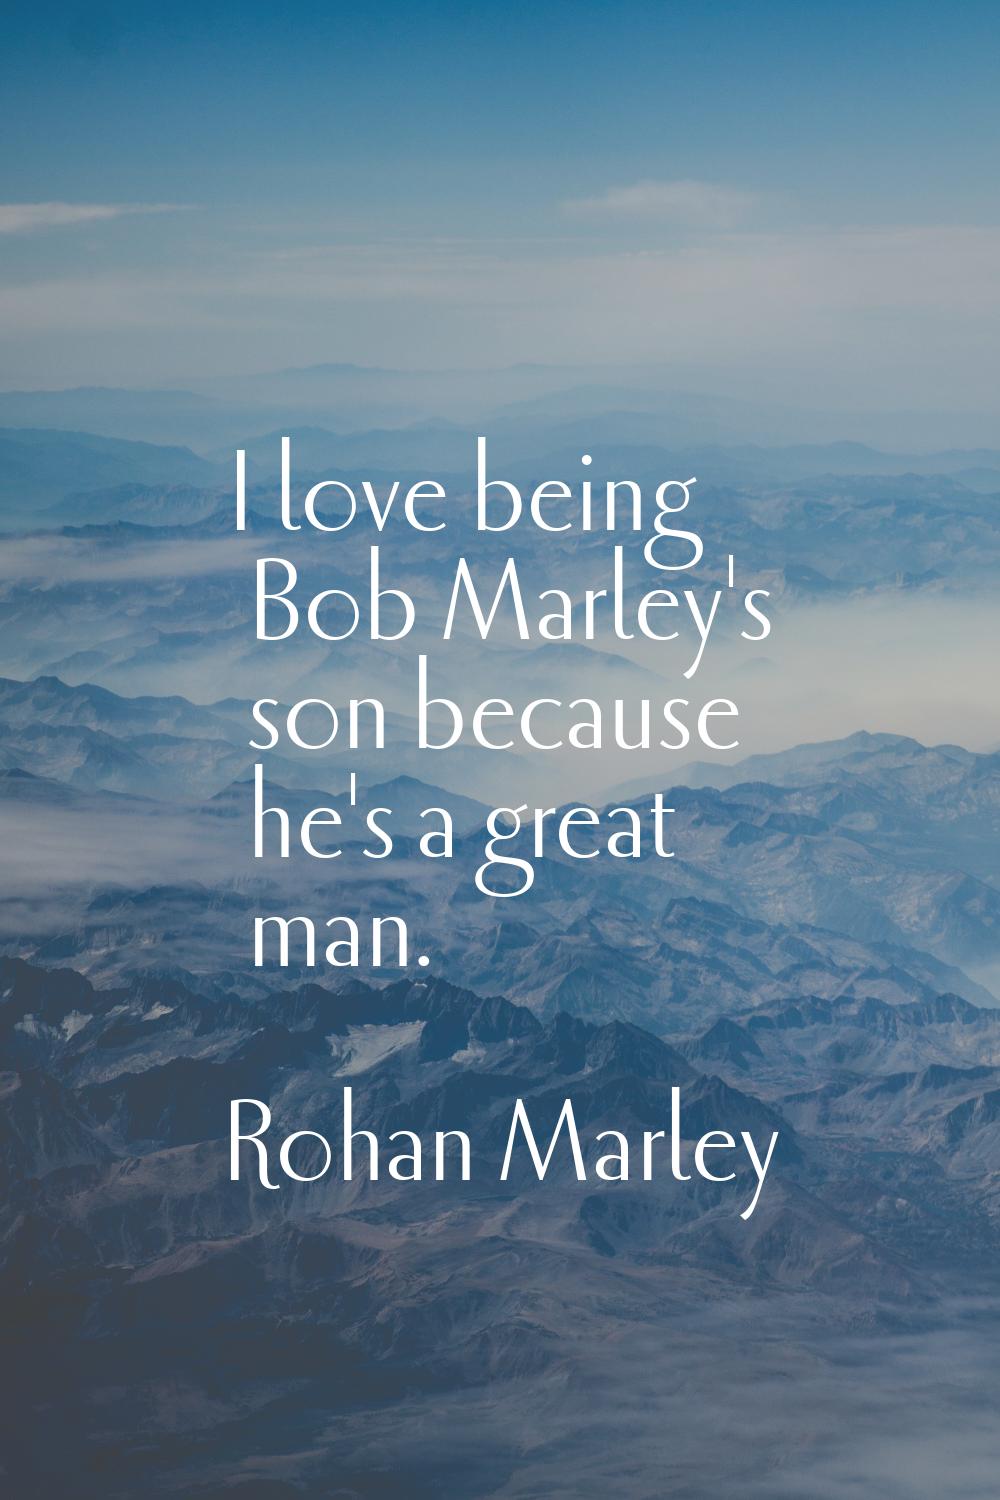 I love being Bob Marley's son because he's a great man.